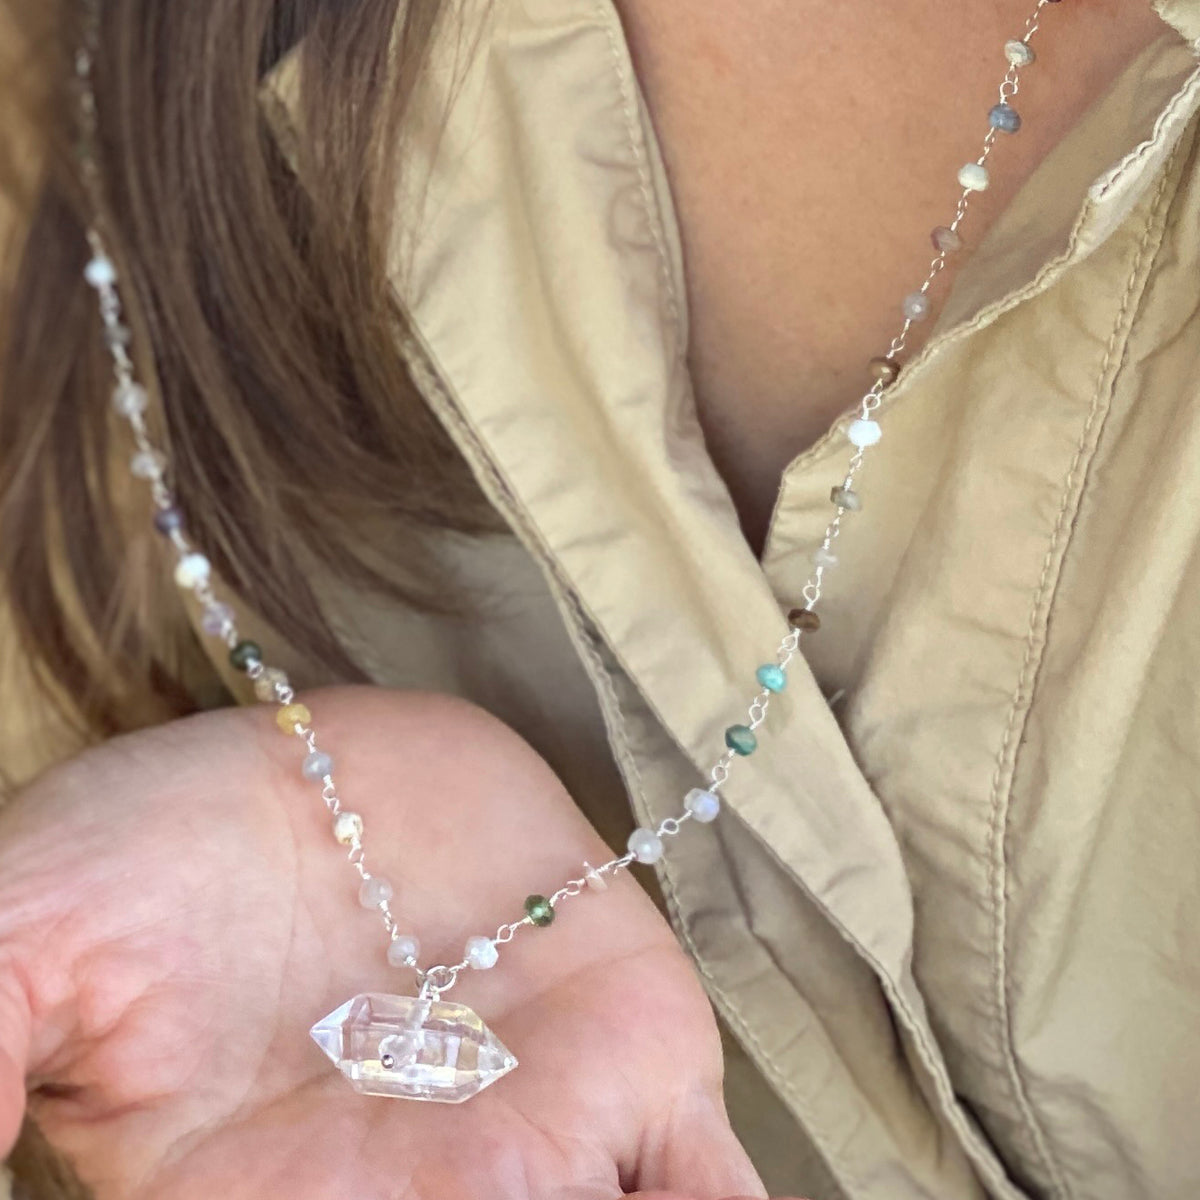 Best crystals for a Happy Life? You found it. Mother Earth Necklace with the Best Healing Crystals for Balanced Life and Happiness. Healing stones, crystals and semi-precious gemstones come from one unified source - Mother Earth. Crystal Energy Necklace.